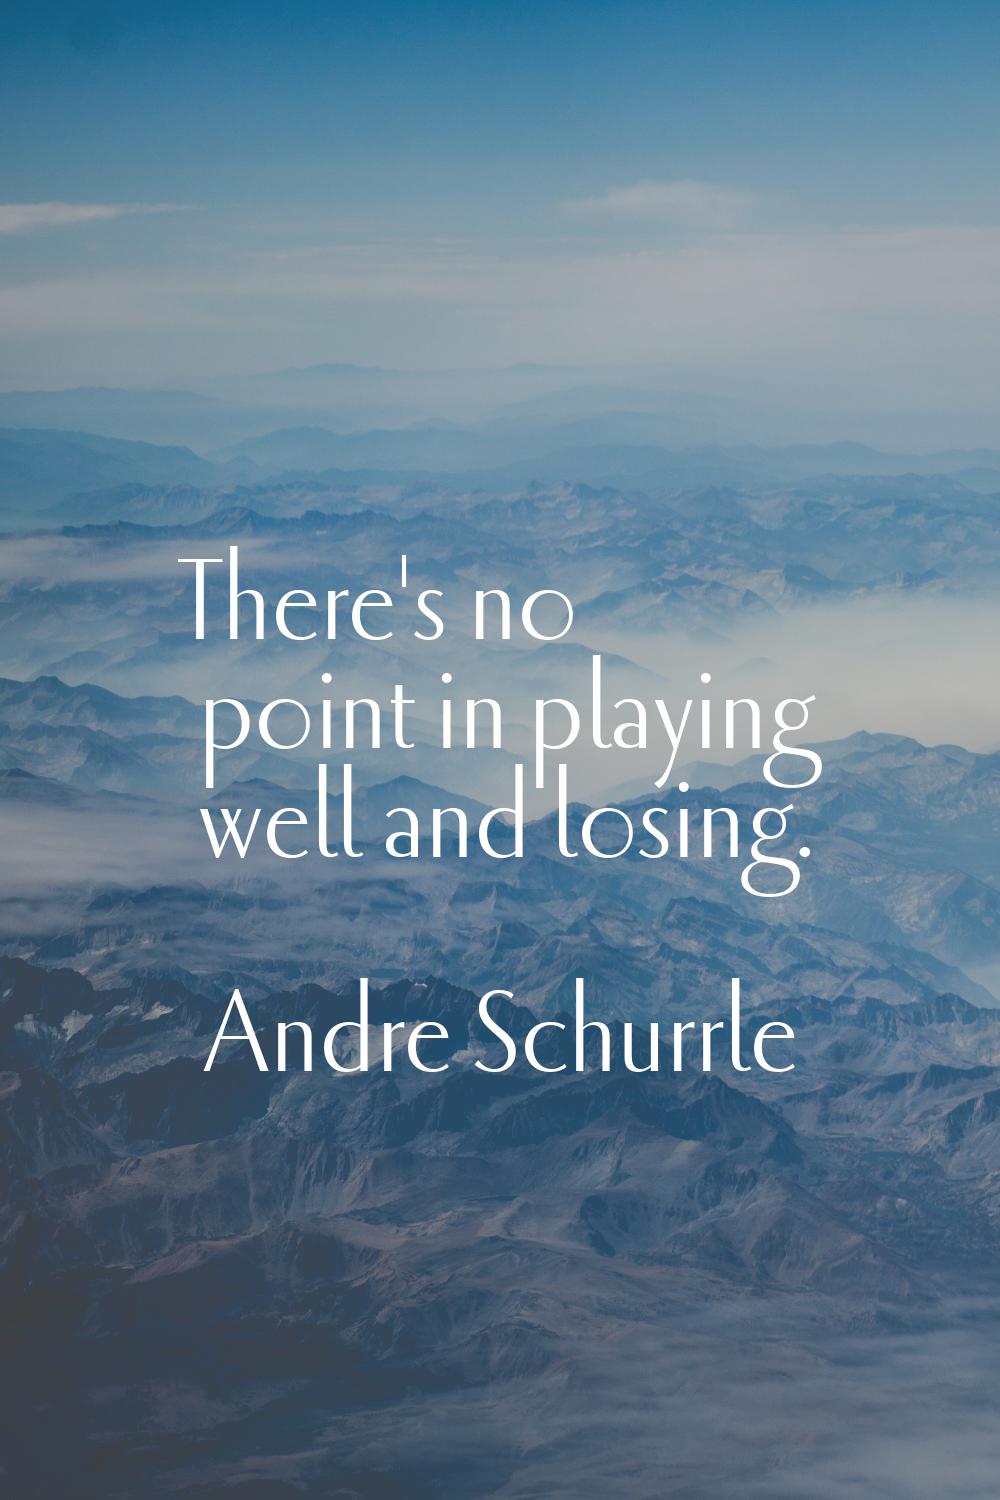 There's no point in playing well and losing.